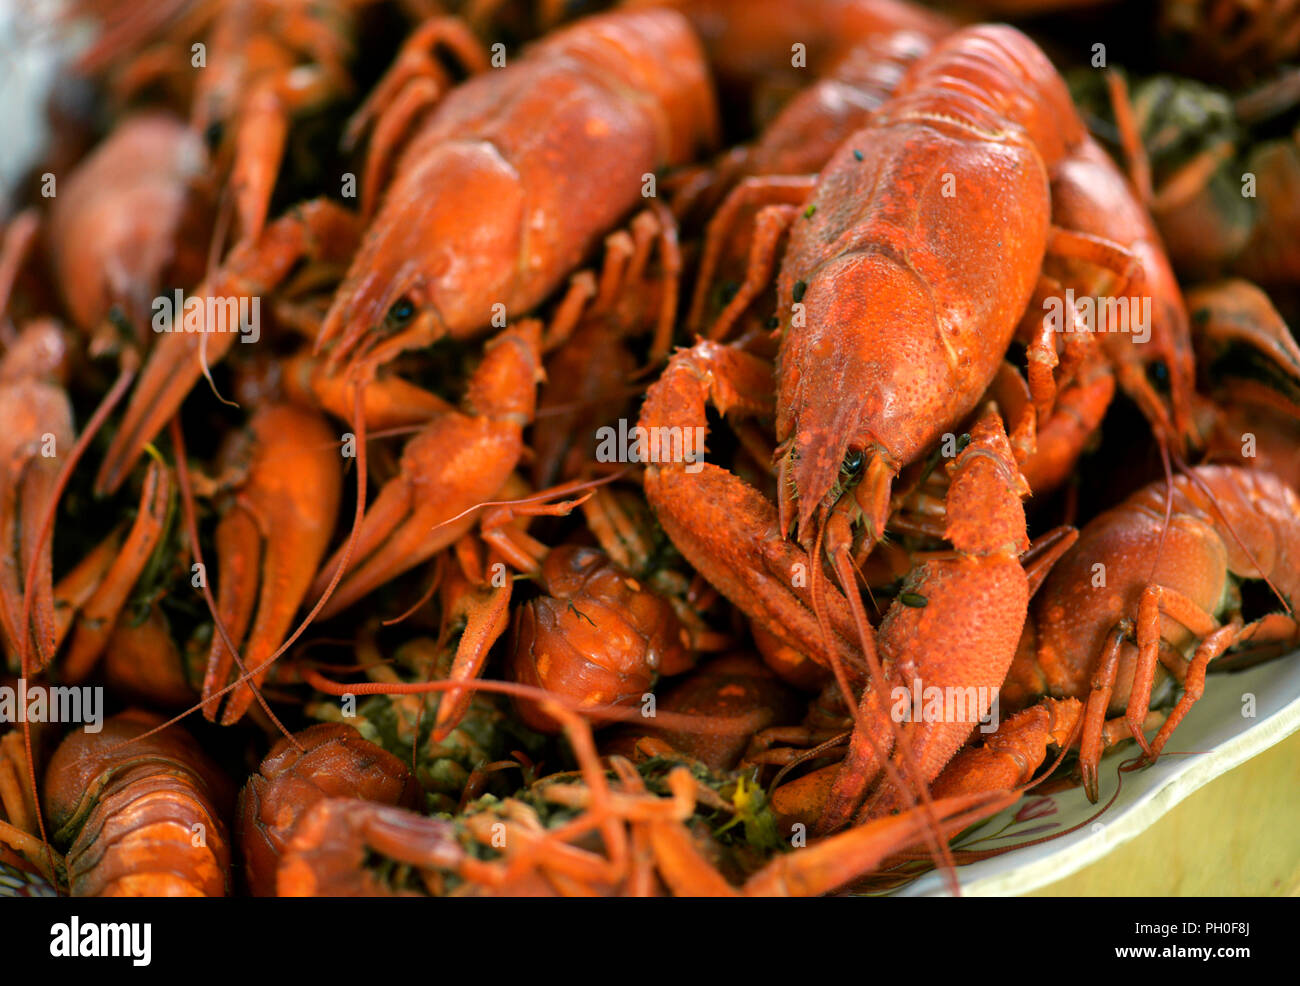 Boiled crayfish close-up, delicious food, diet food. Stock Photo